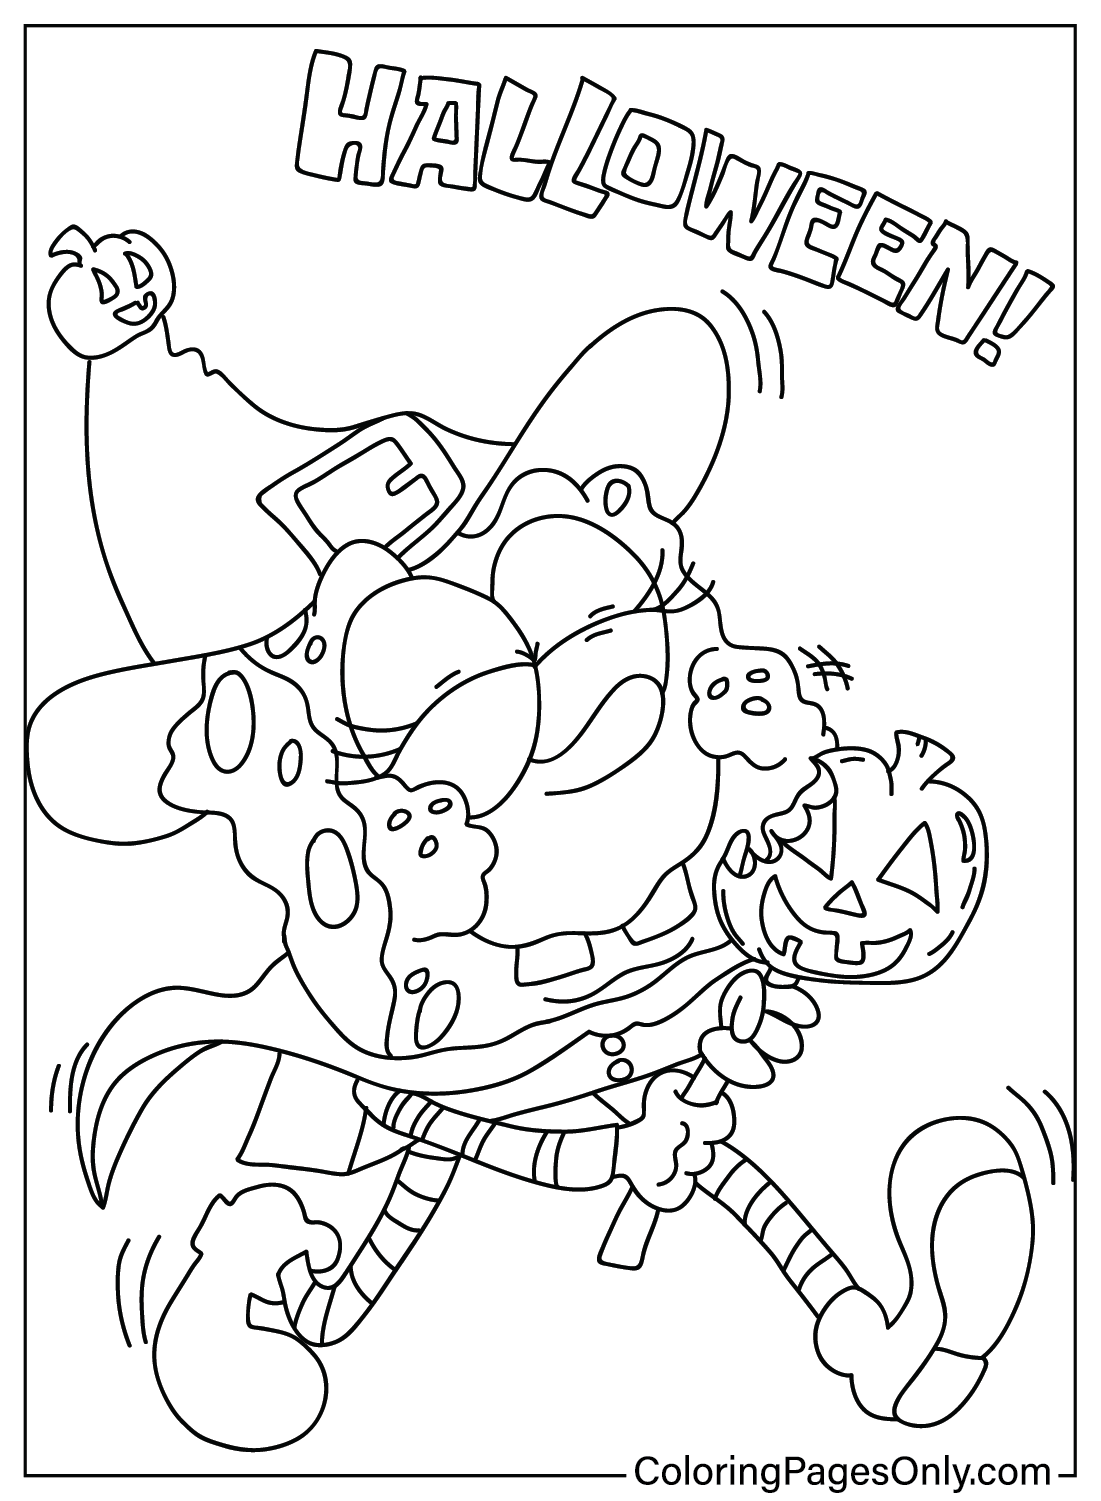 Spongebob Halloween Coloring Pages - Free Printable Coloring Pages